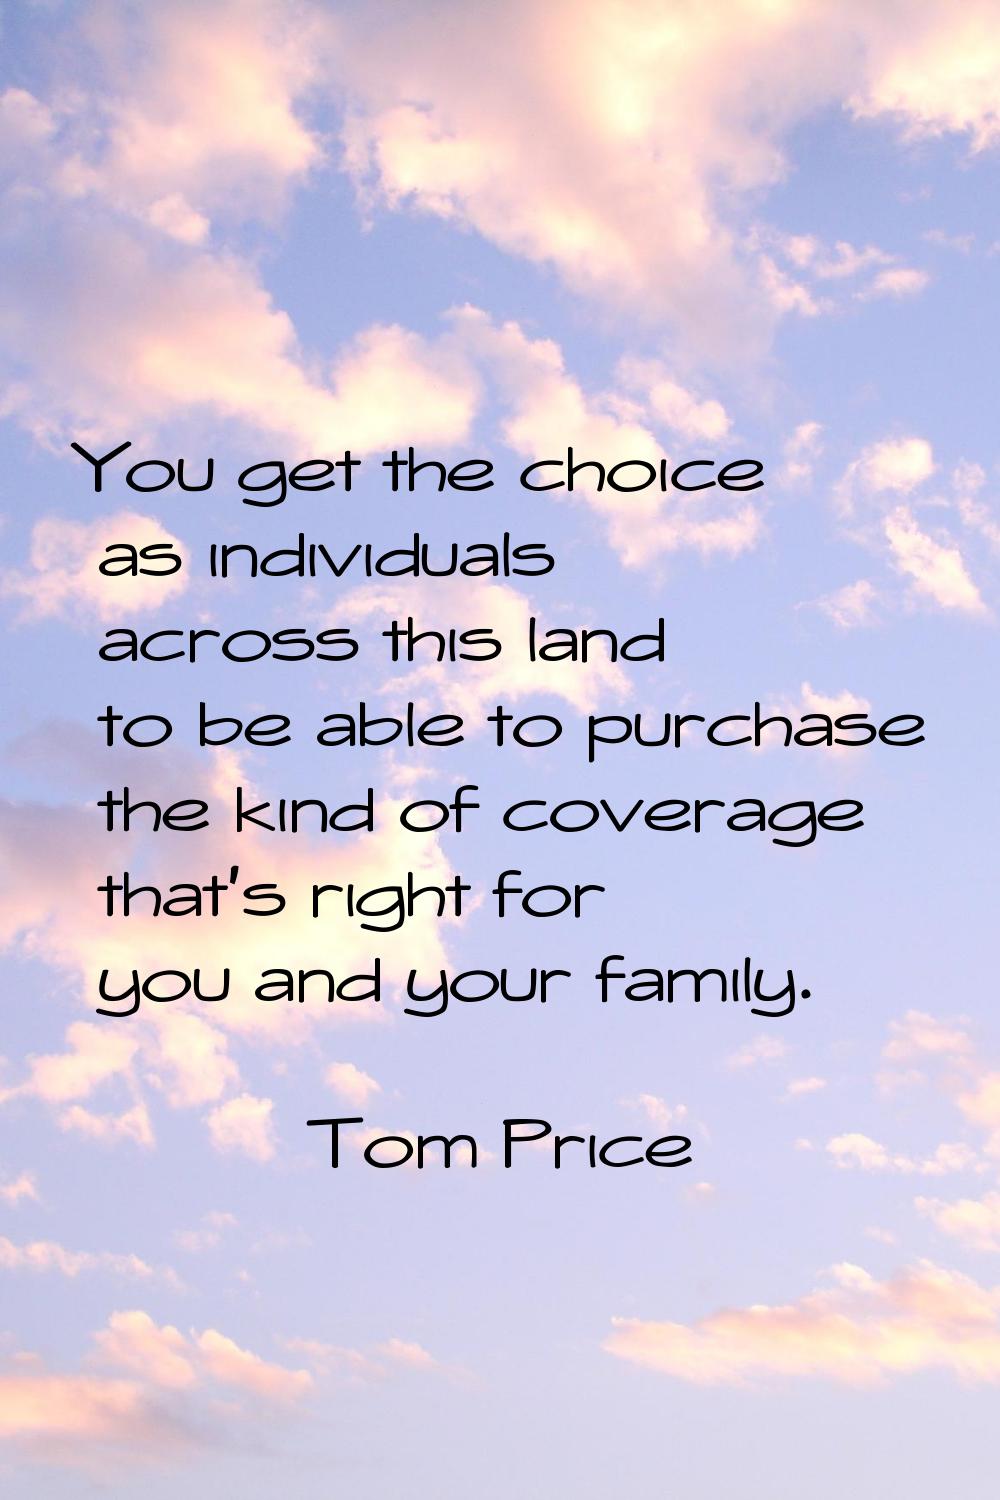 You get the choice as individuals across this land to be able to purchase the kind of coverage that